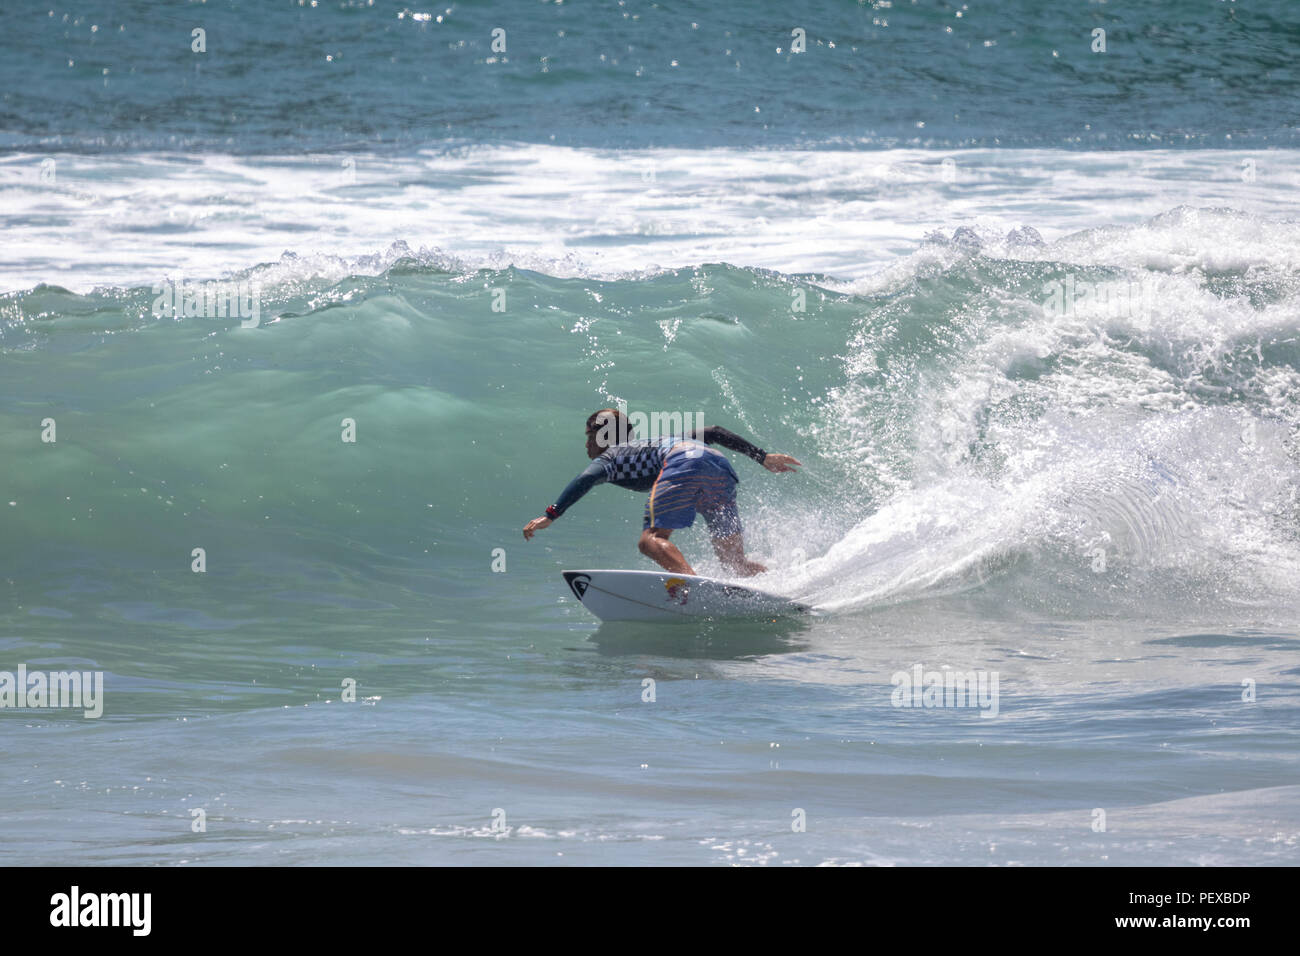 Kanoa Igarashi competing in the US Open of Surfing 2018 Stock Photo